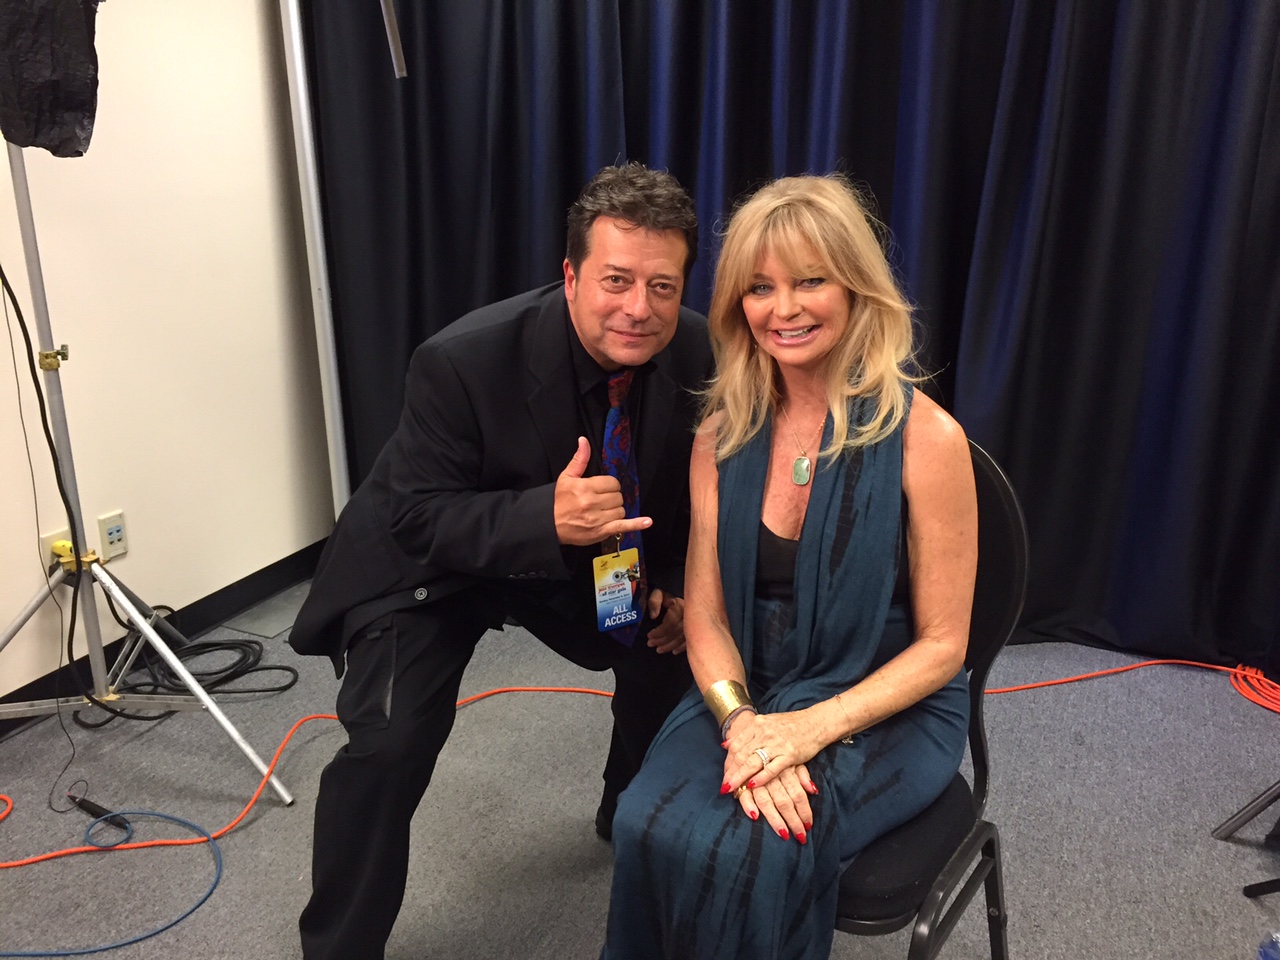 Kenneth K. Martinez Burgmaier Directed & Producer working with Academy Award winner Goldie Hawn 2014 at the Dolby Theater in Hollywood